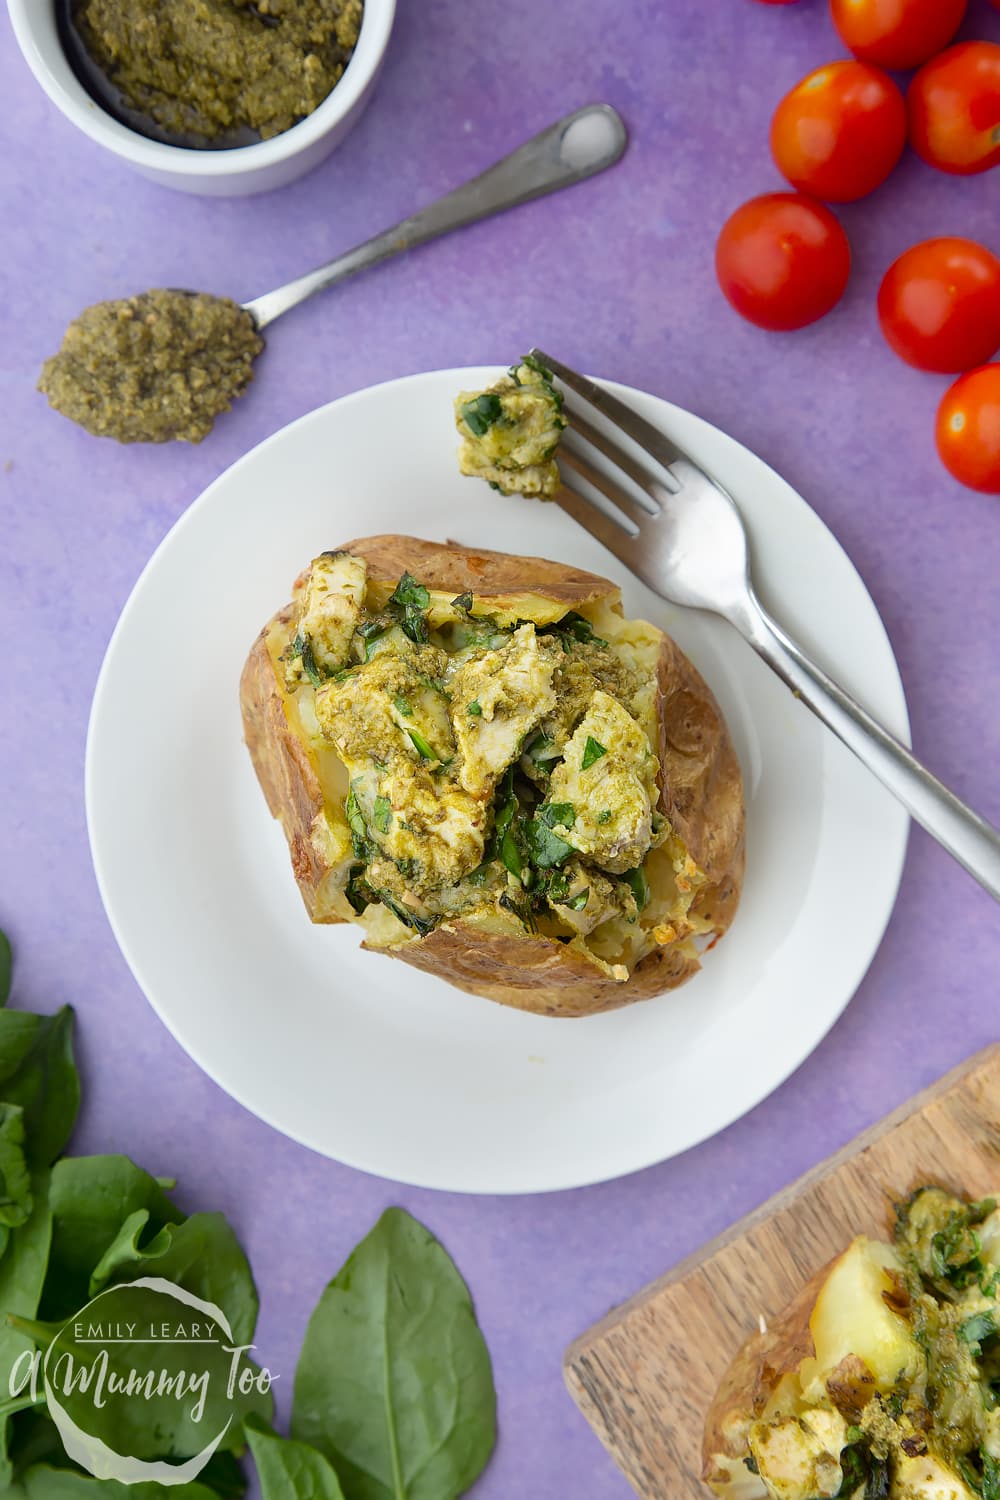 From above, a jacket potato with cheesy pesto chicken on a white plate. The potato is piled high with a pesto, spinach cheese and chicken mix. A fork rests to the side.